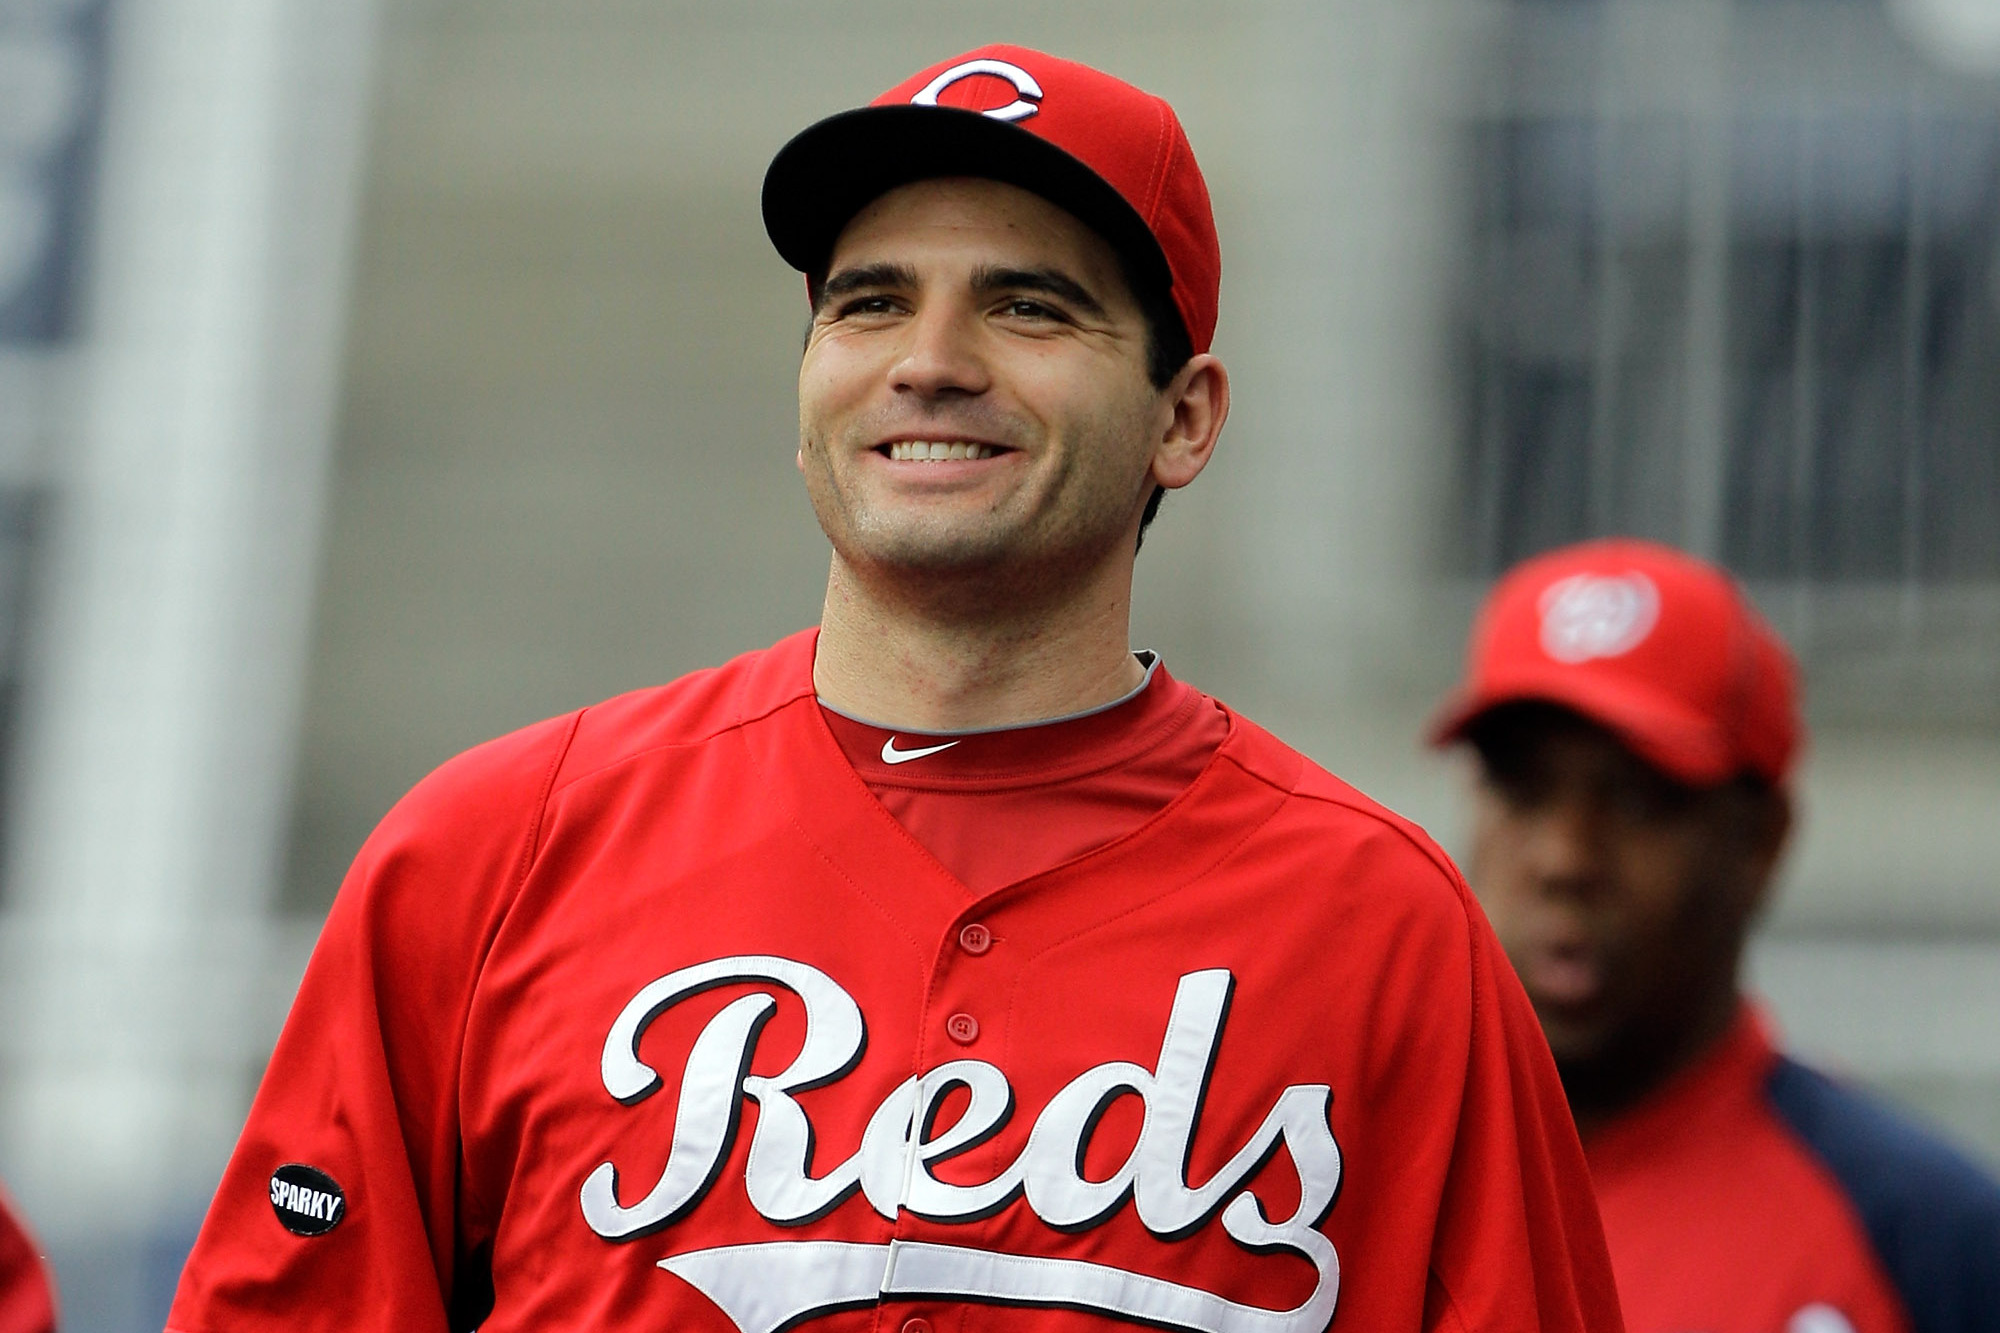 Will Reds' icon Joey Votto retire after the 2023 season finale?